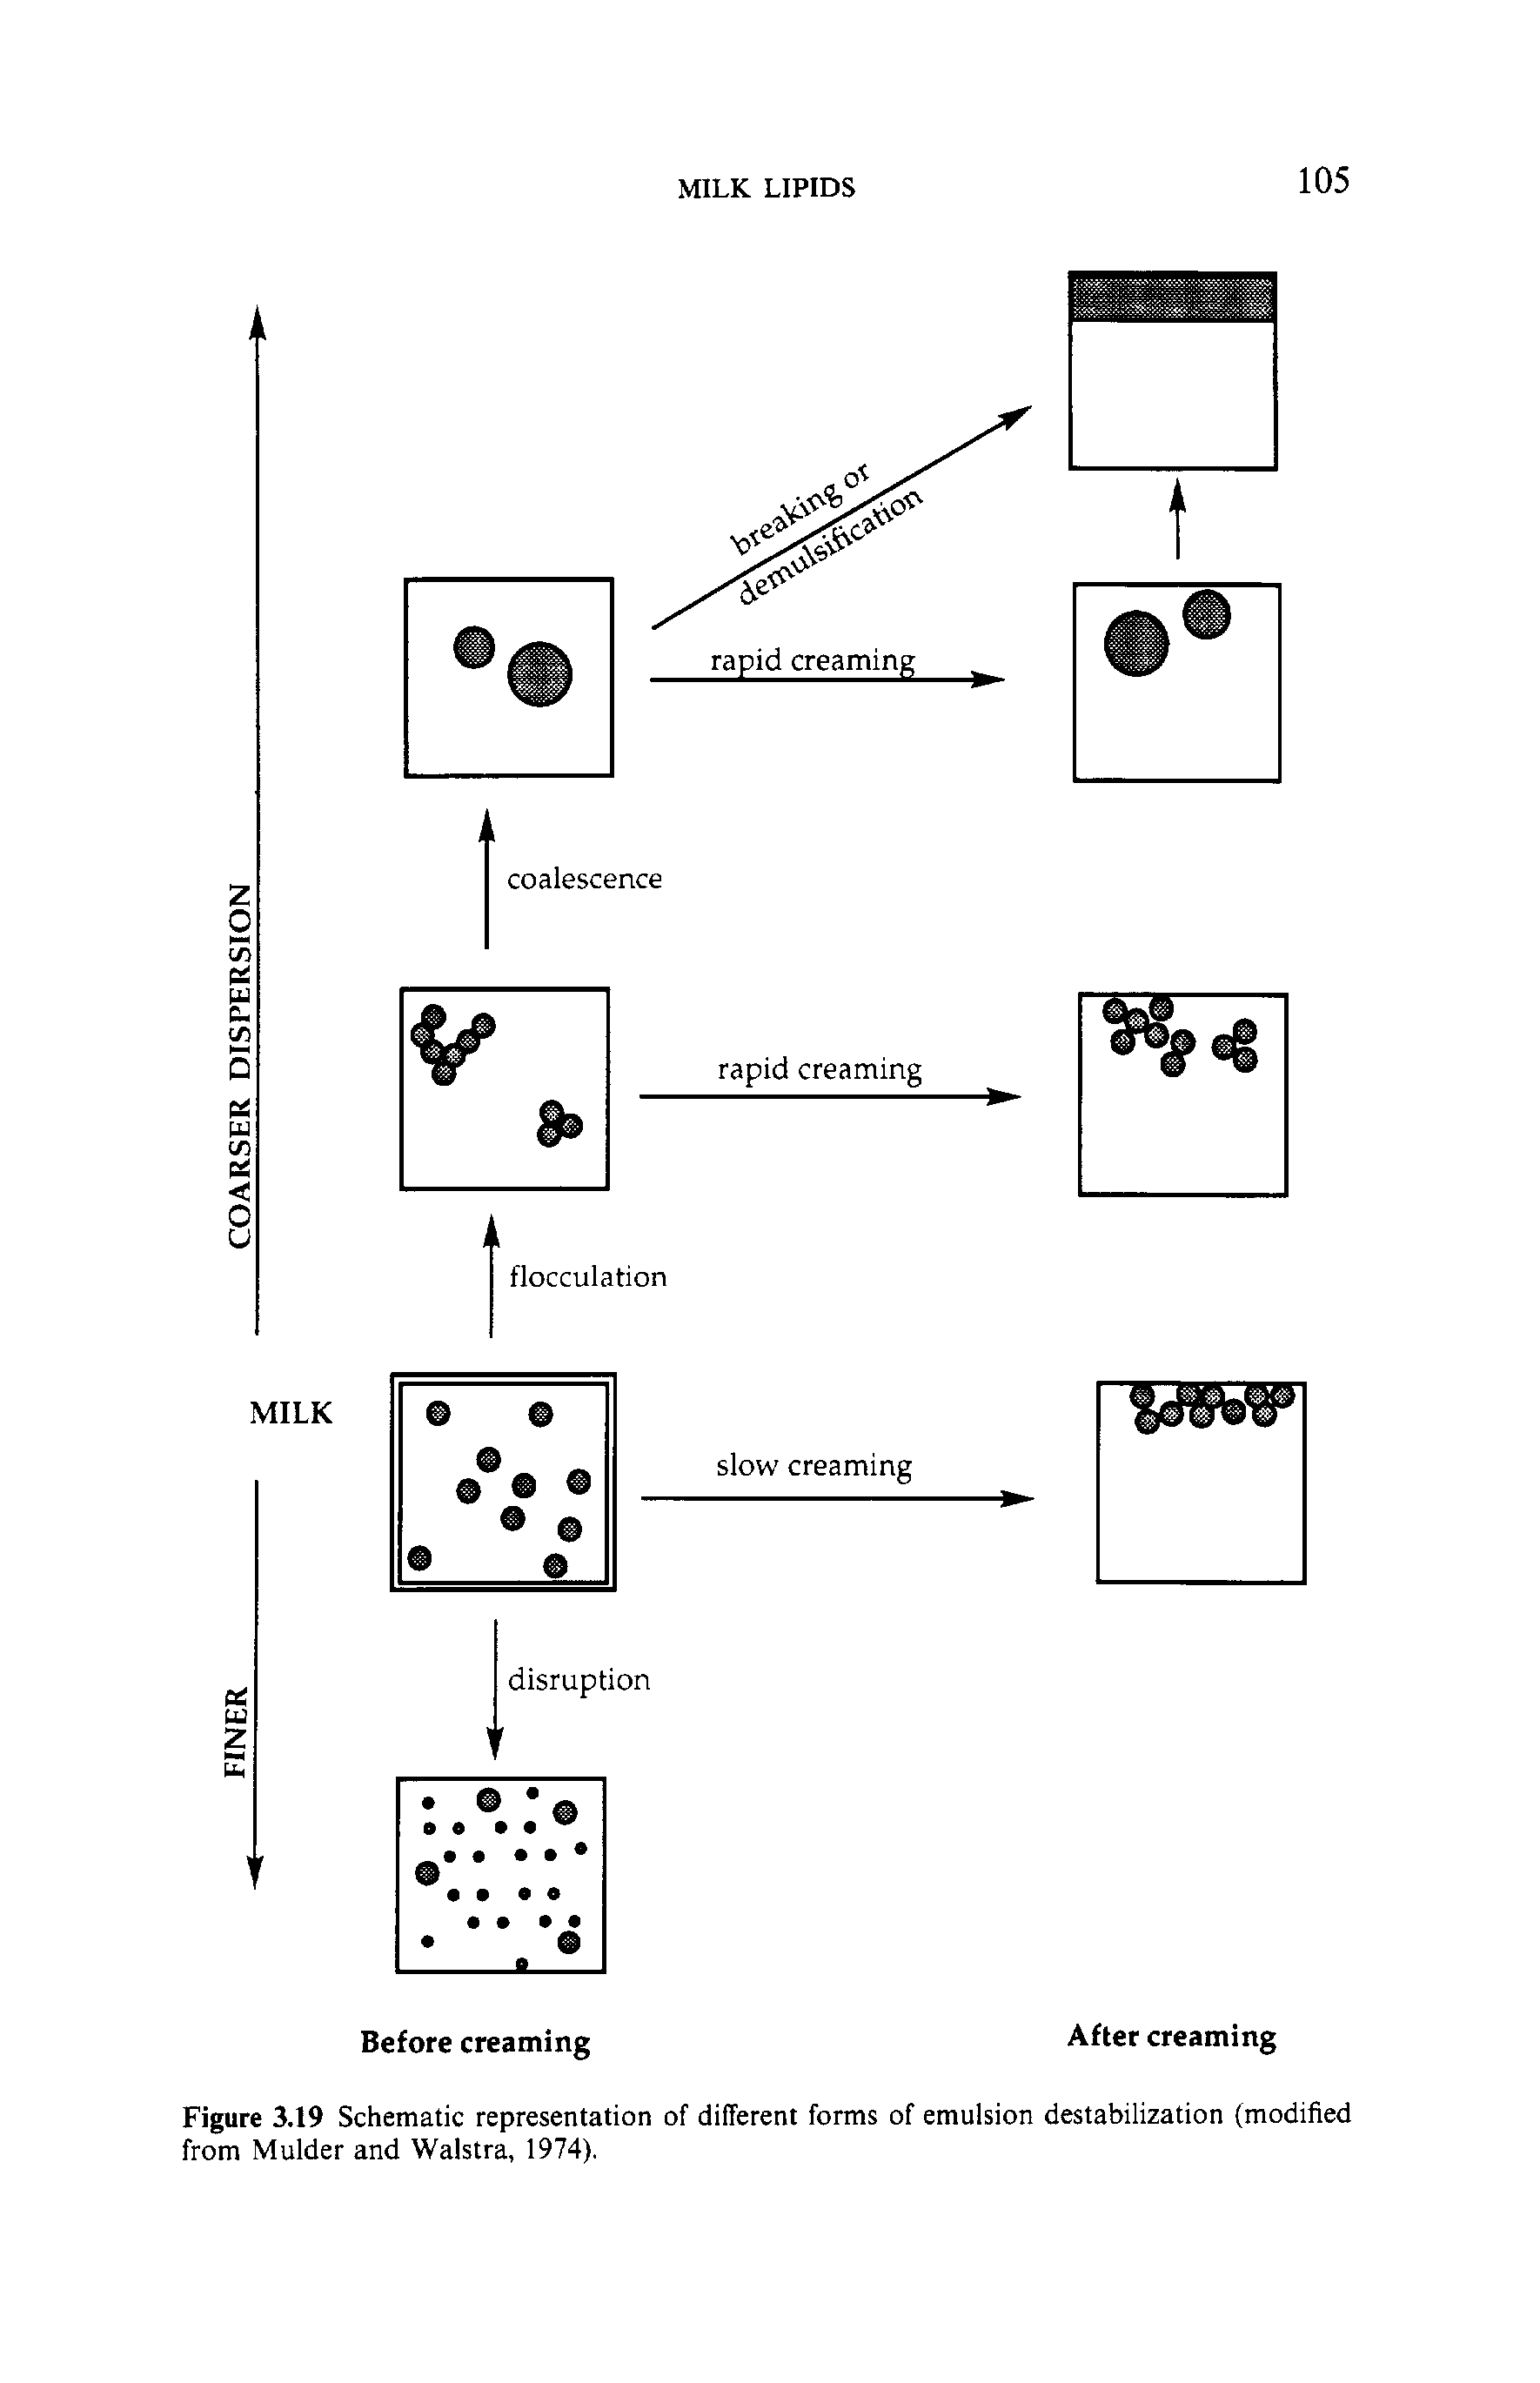 Figure 3.19 Schematic representation of different forms of emulsion destabilization (modified from Mulder and Walstra, 1974),...